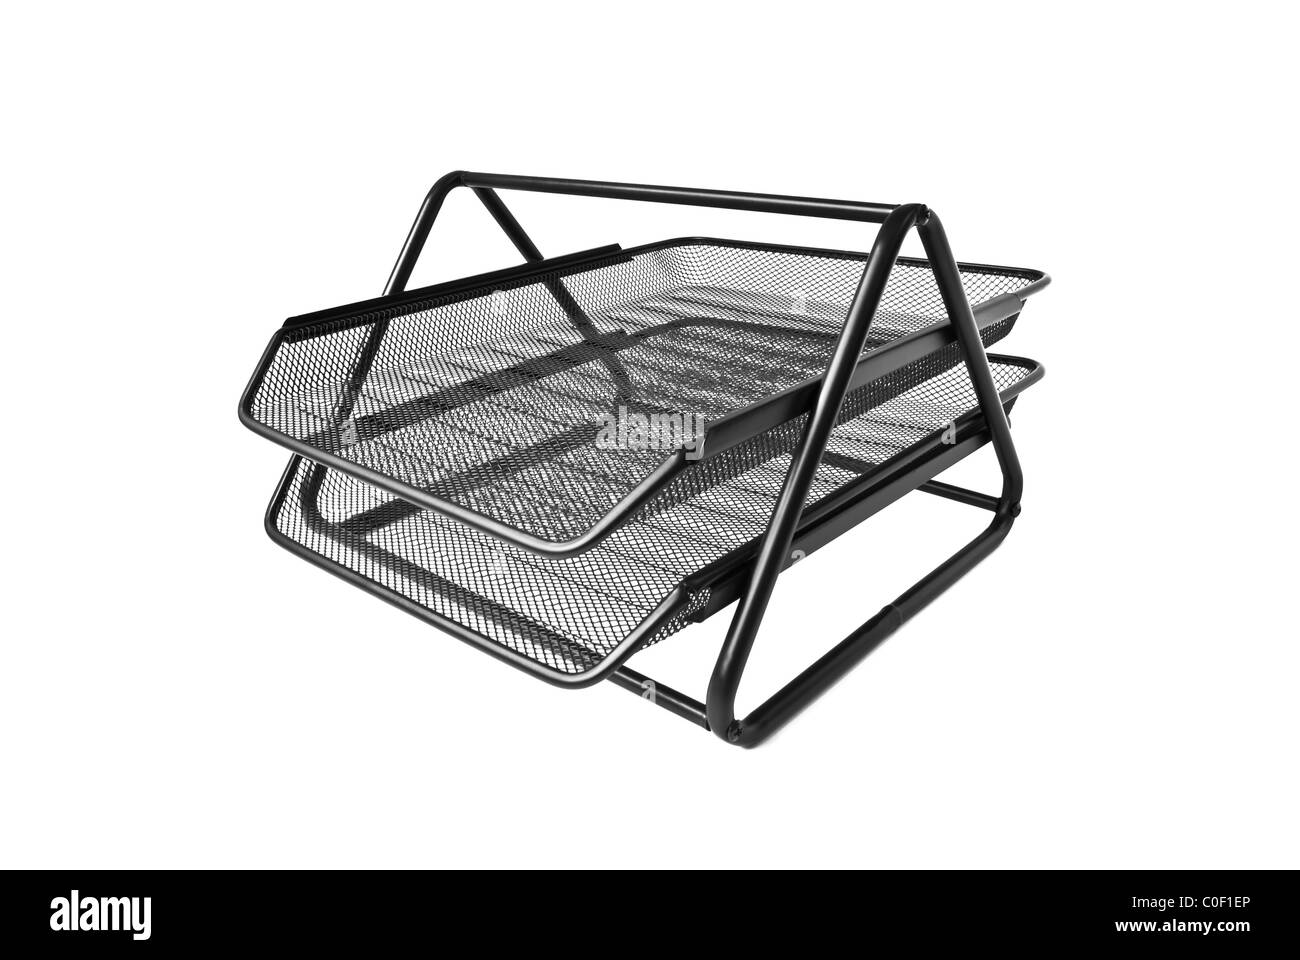 2-tier document tray isolated on white Stock Photo - Alamy